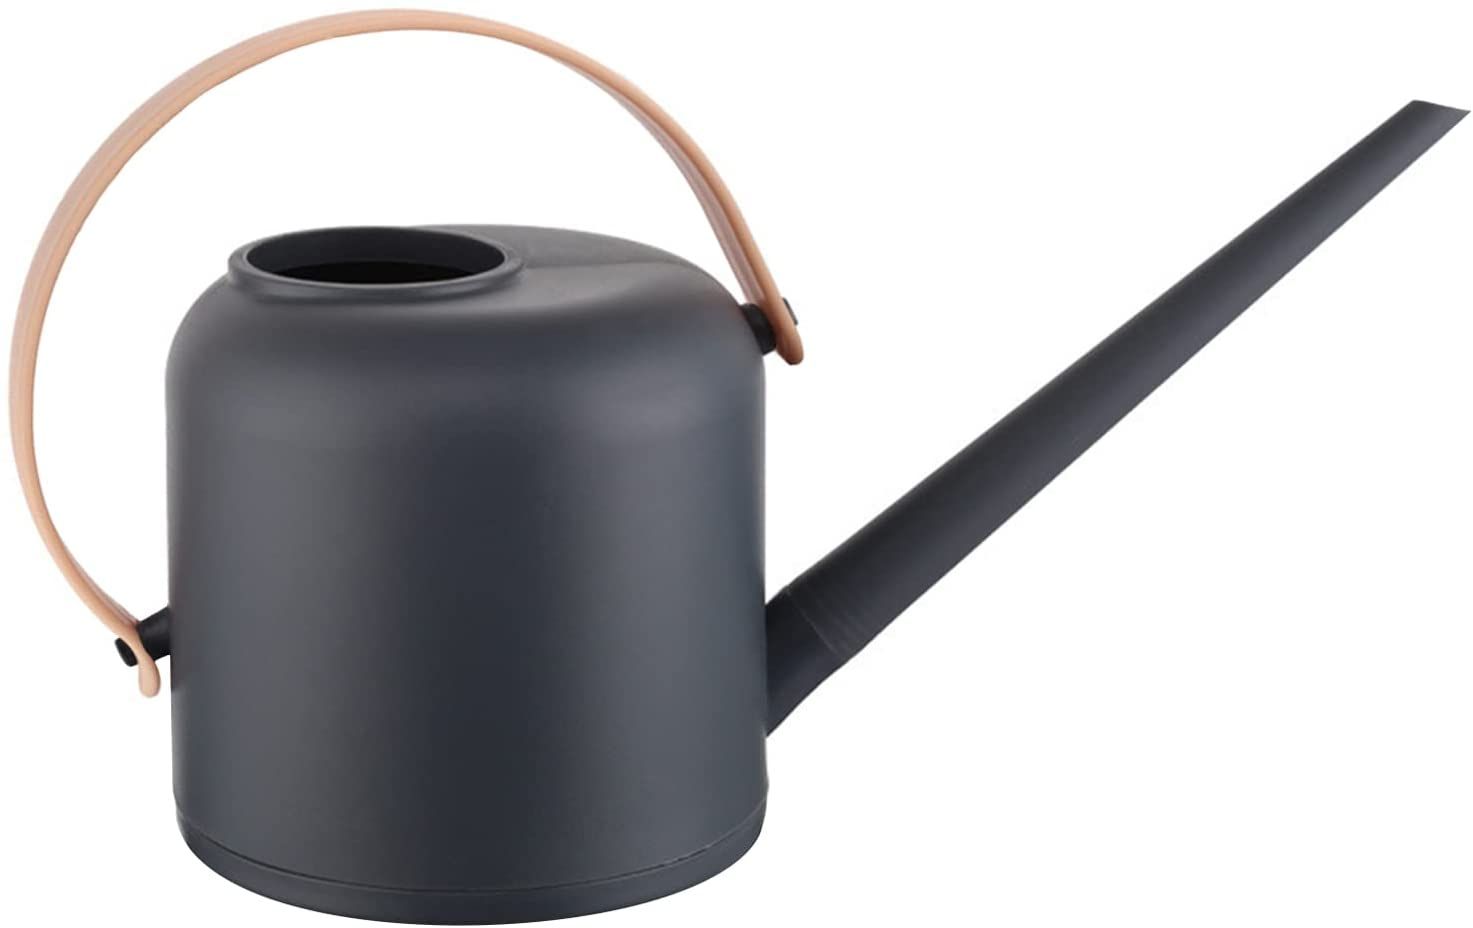 Vaupan Watering Can, Press profile homify Press profile homify Terrace